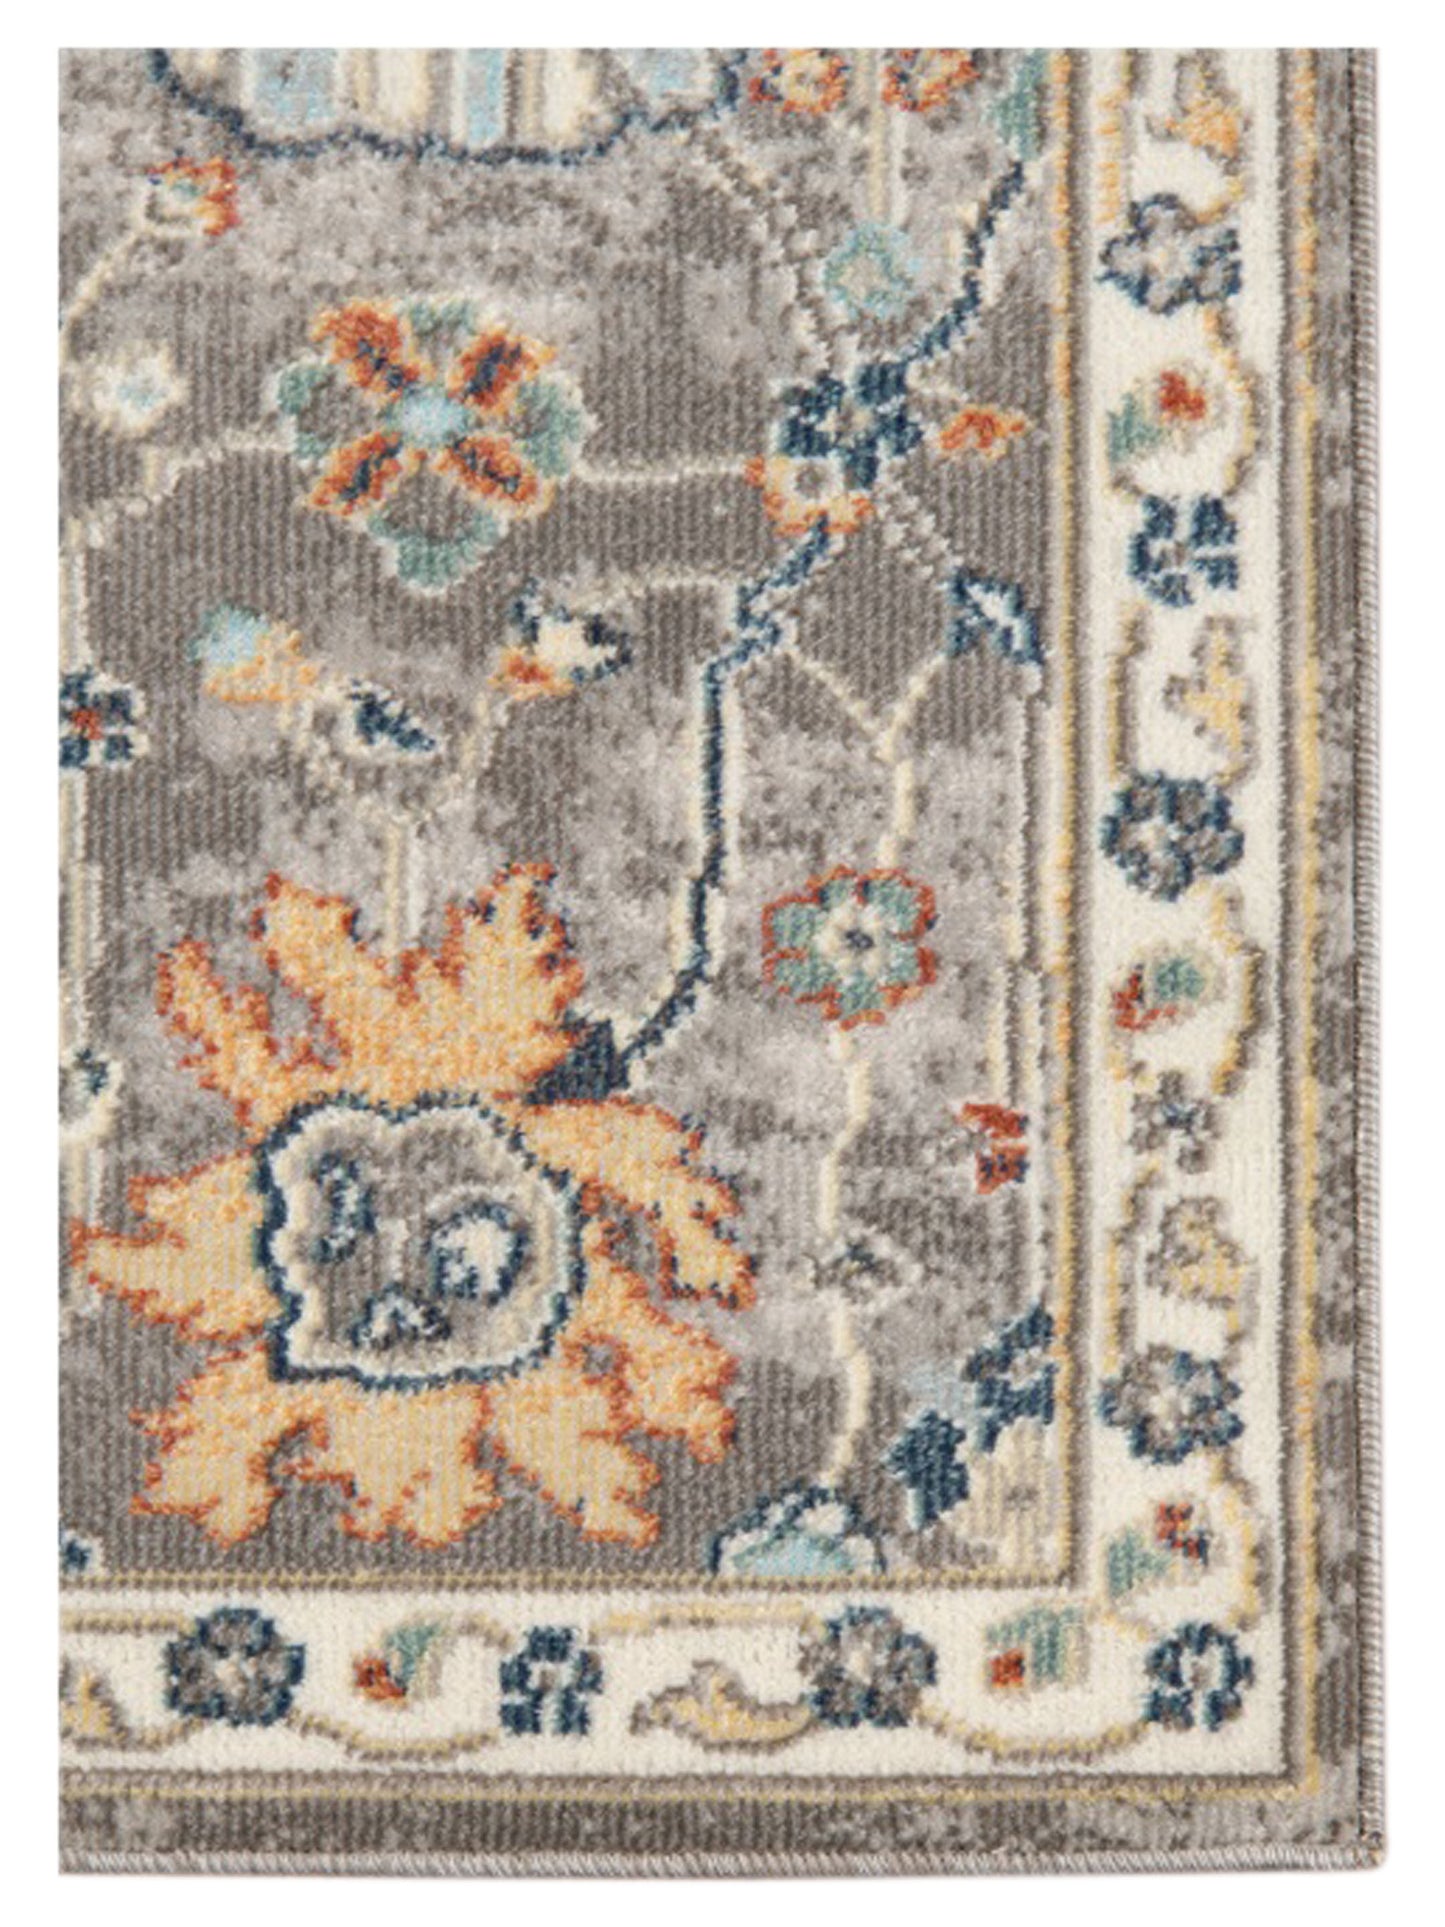 Limited Shay SF-406 GRAY  Traditional Machinemade Rug